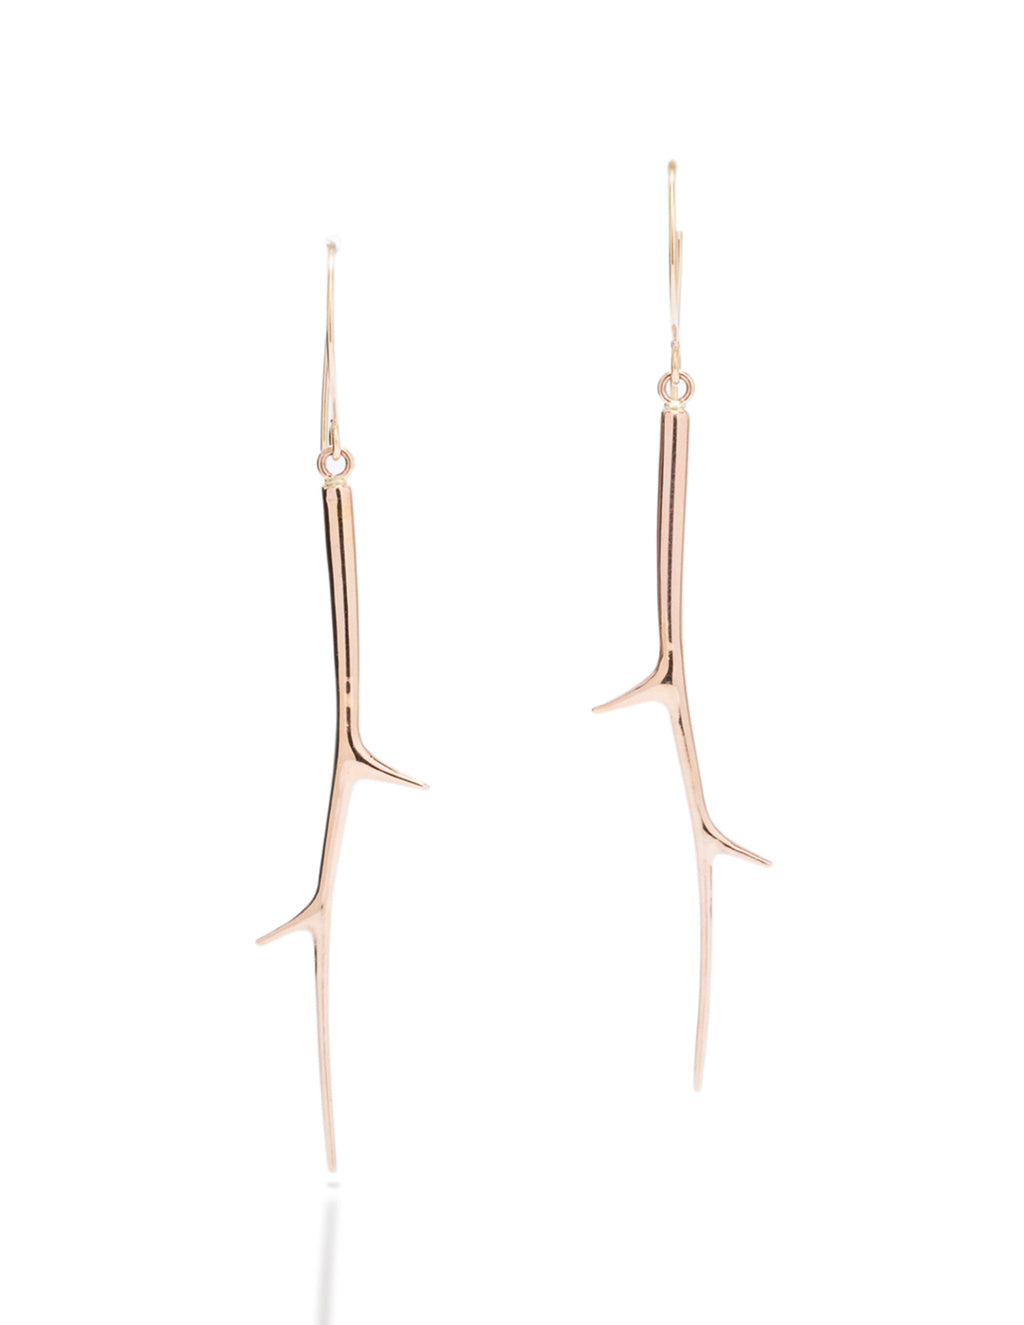 Rose Gold Polished Branch Drop Earrings - Charles Koll Jewellers